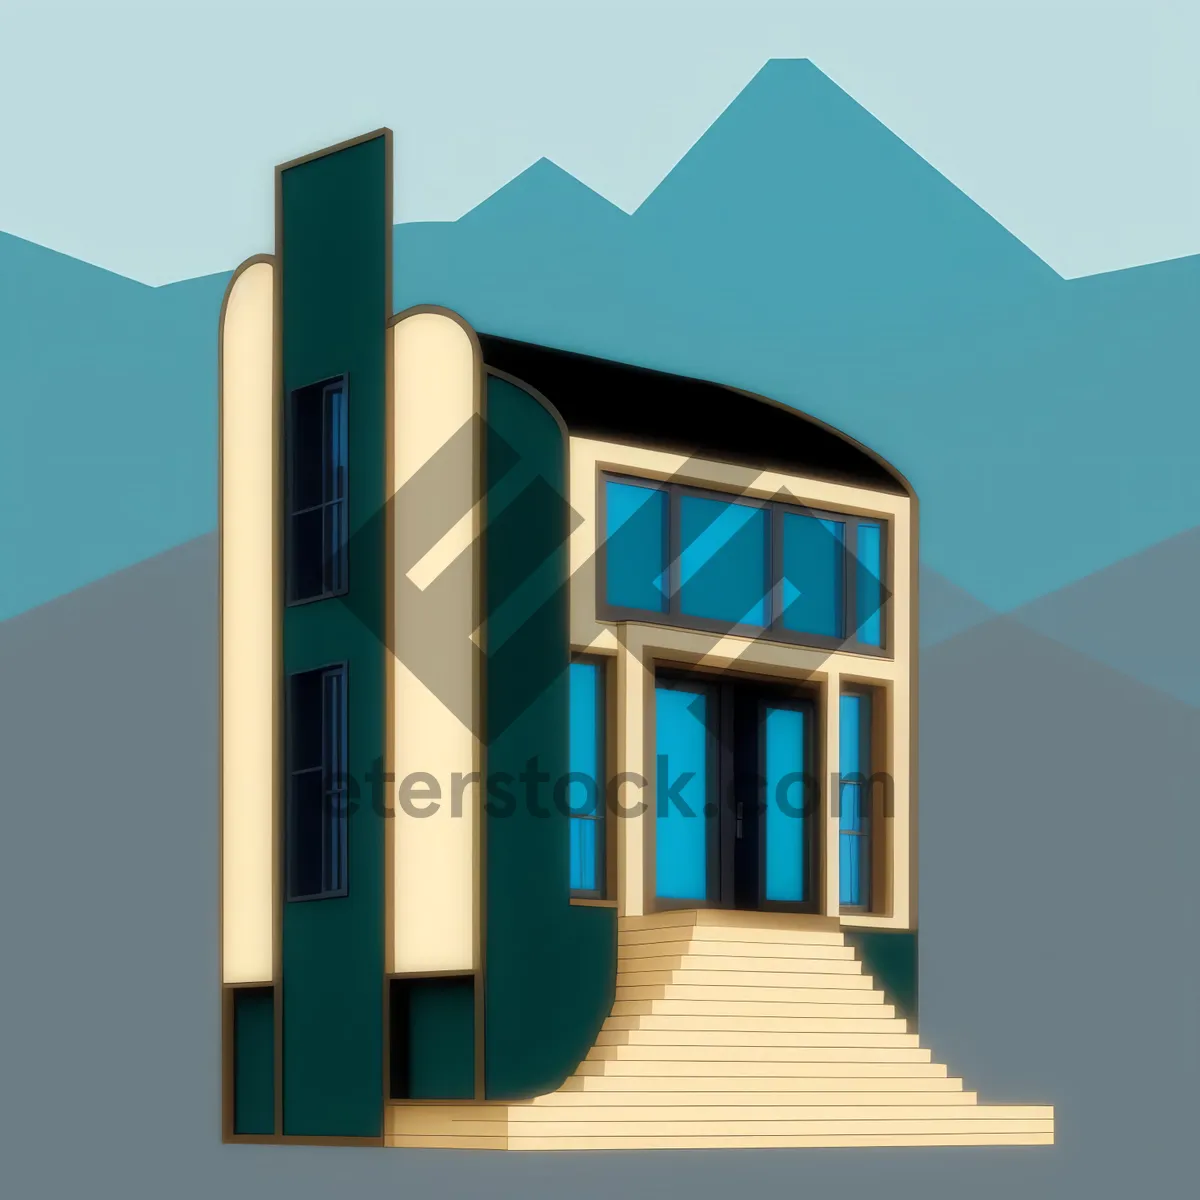 Picture of 3D Graphic Business House Design with Stairs.